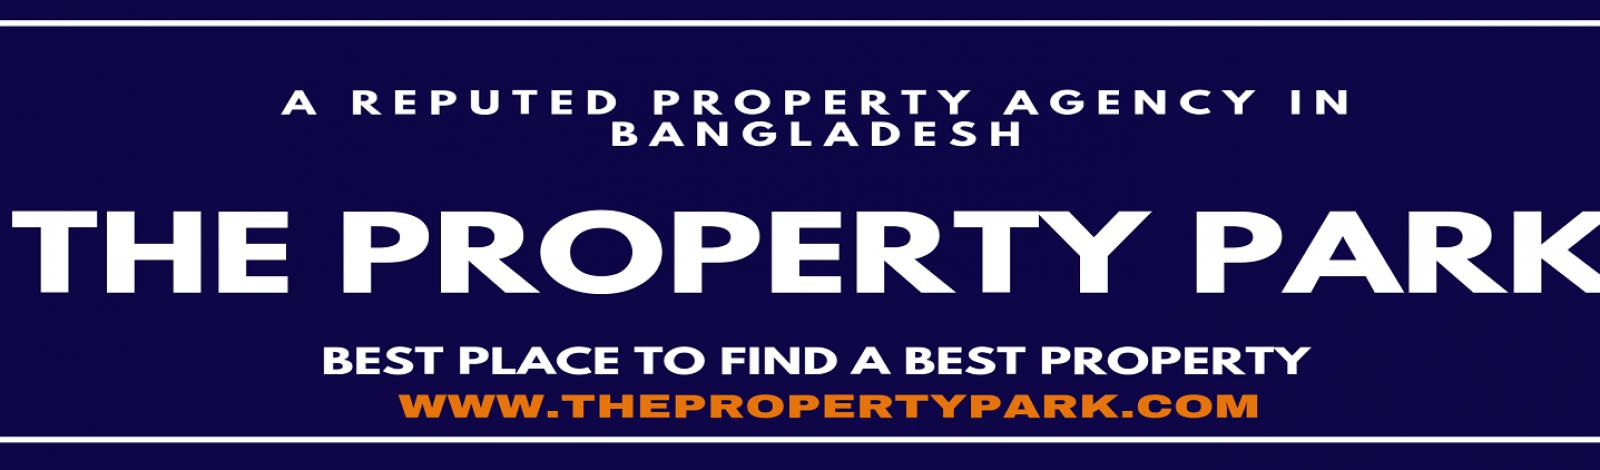 THE PROPERTY PARK banner